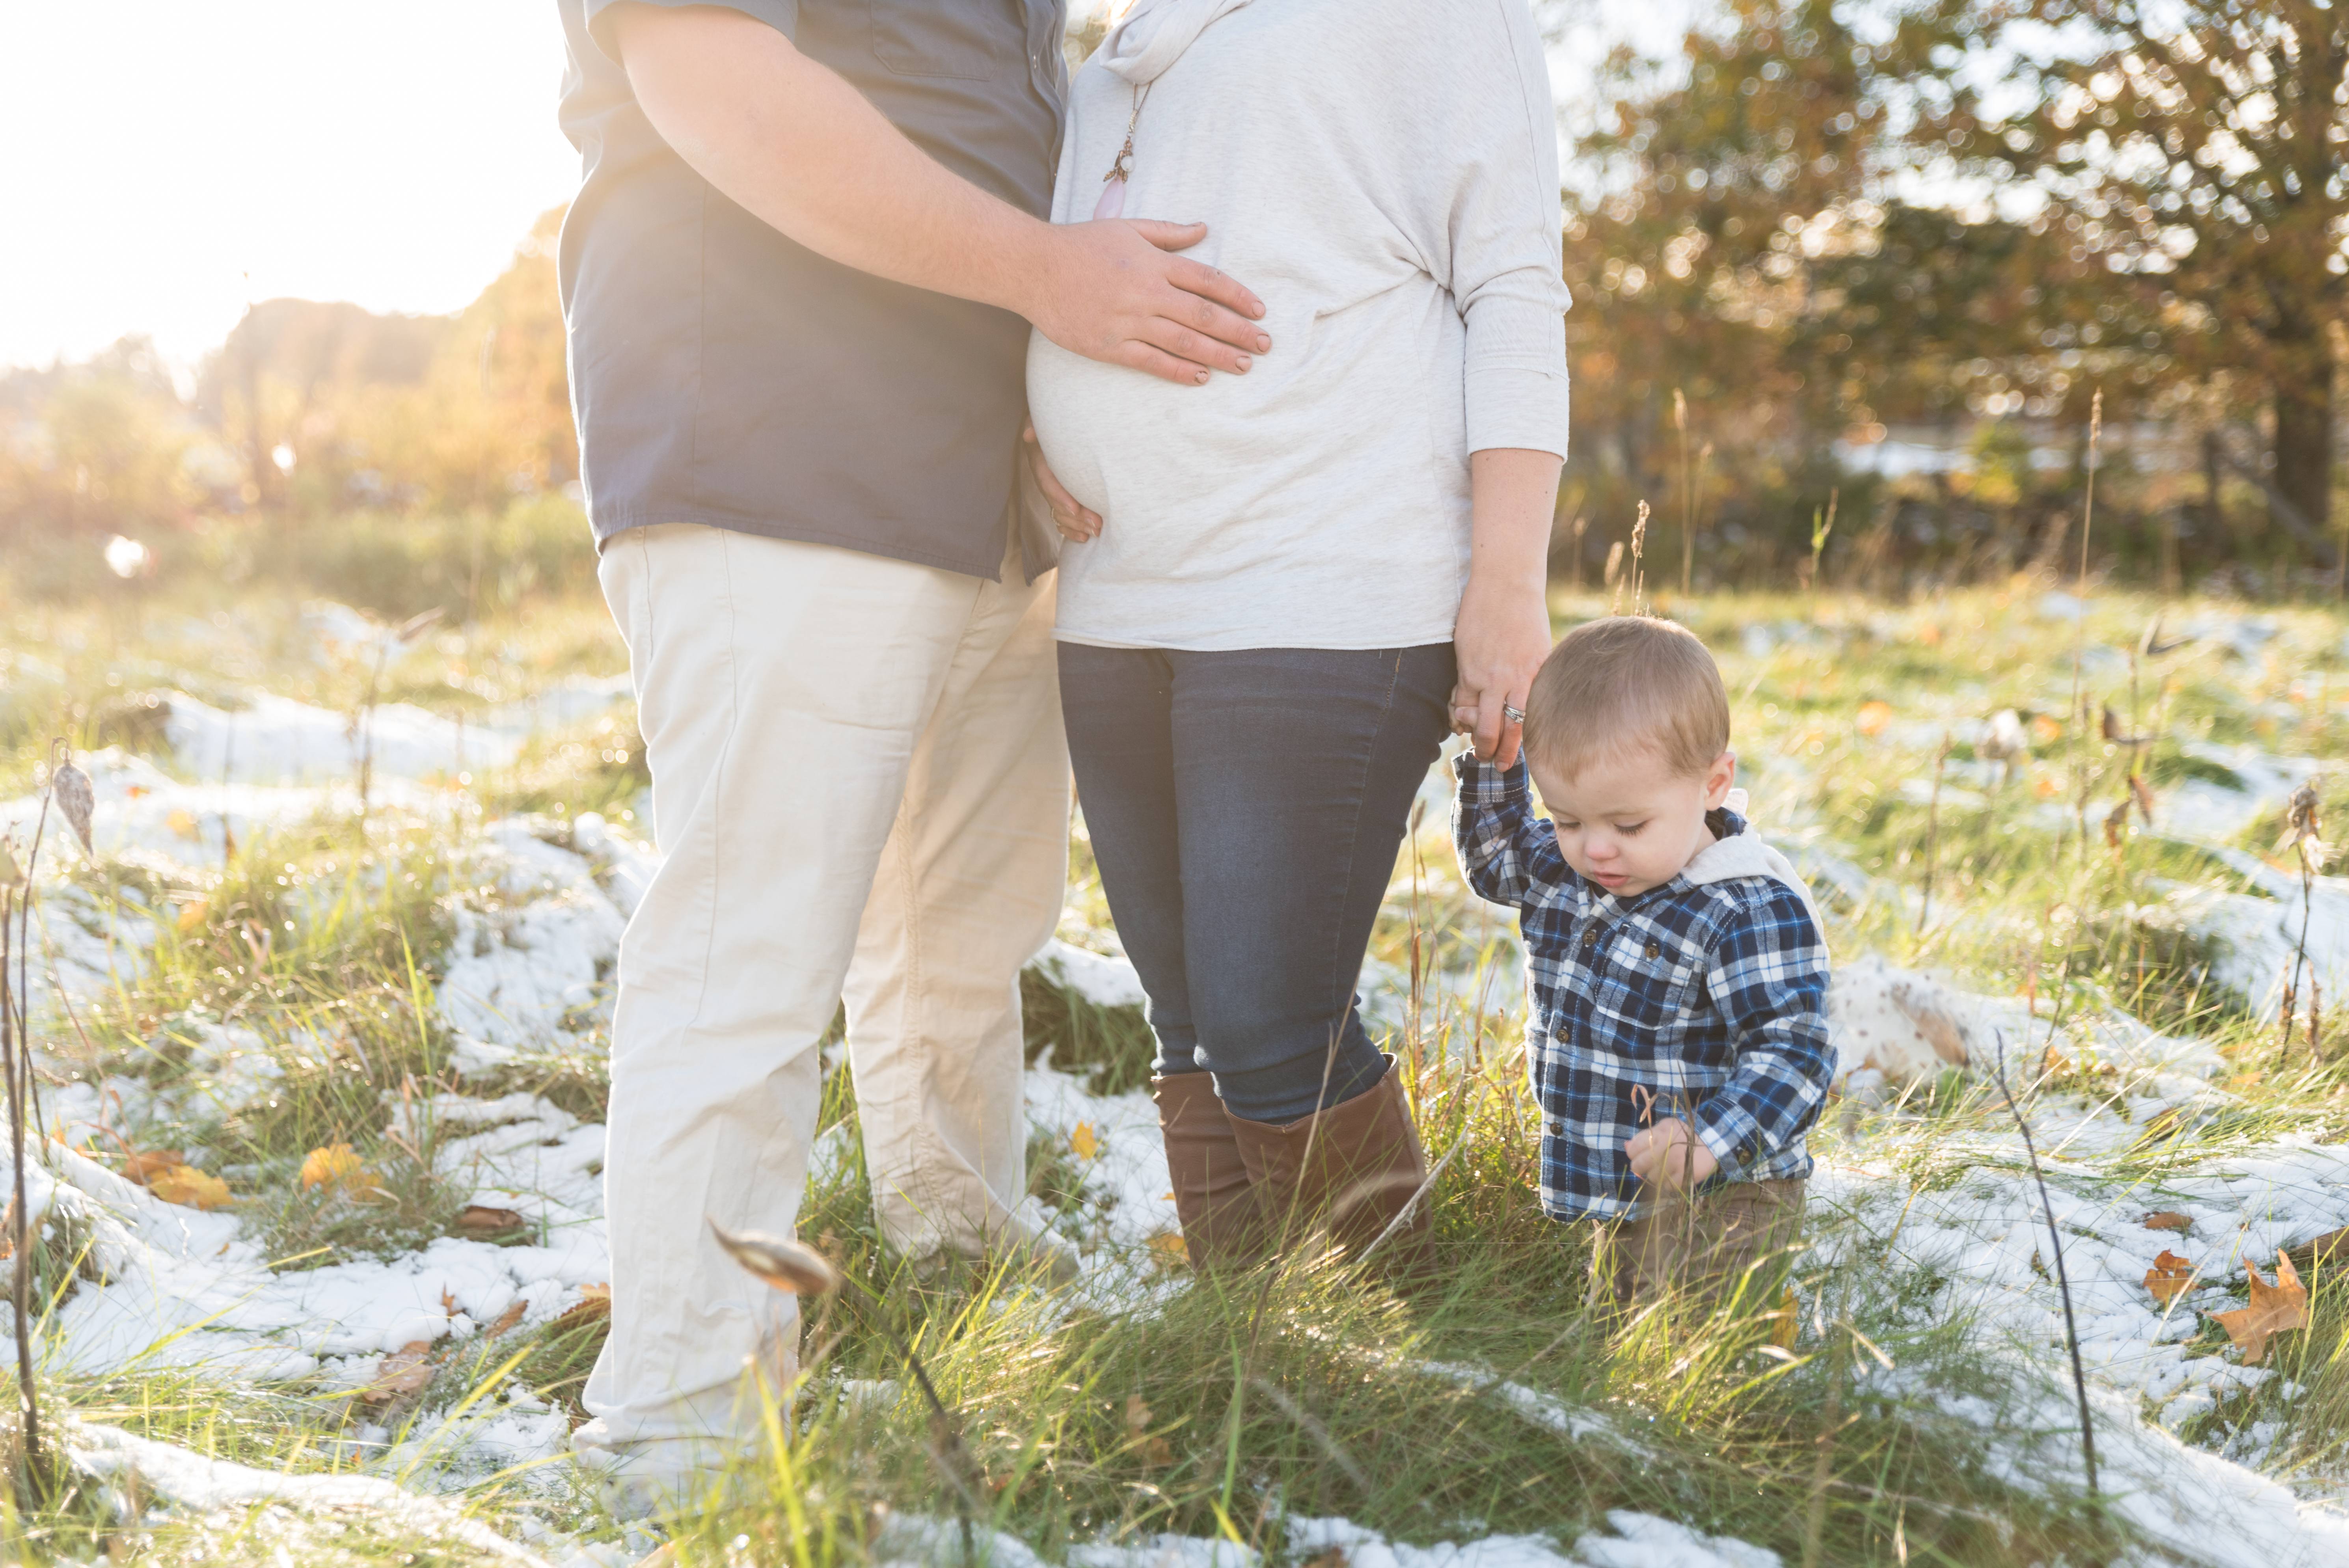 Whitefield Maternity Photographer 2 1 - Maternity Photography